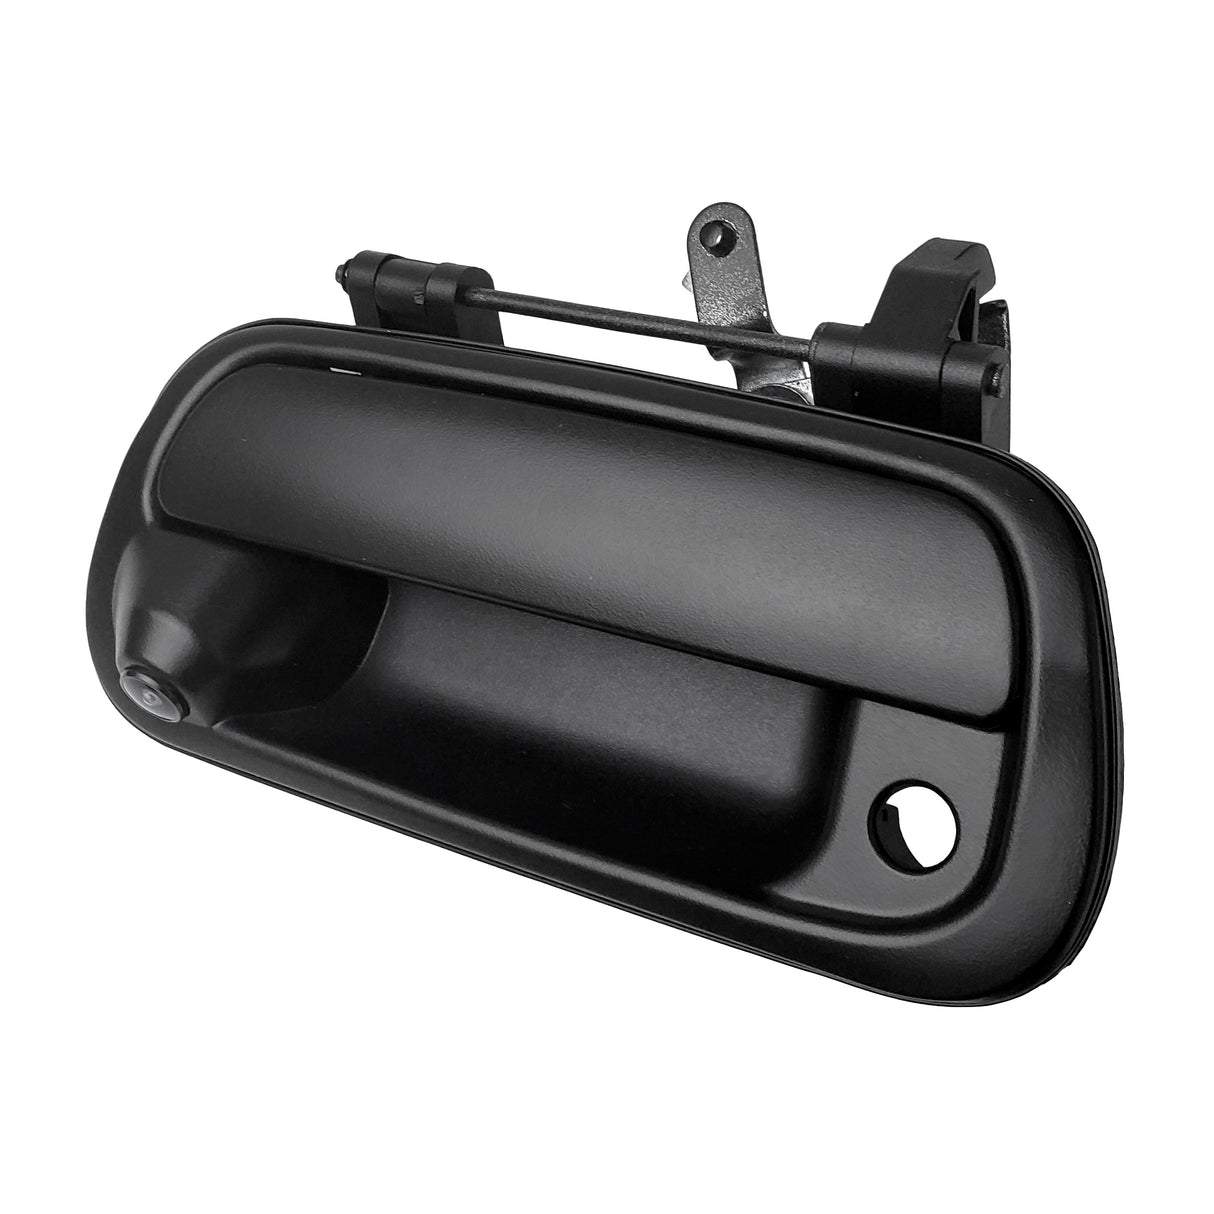 Toyota Tundra (2000-2006) Black Metal Replacement Tailgate Handle with Backup Camera